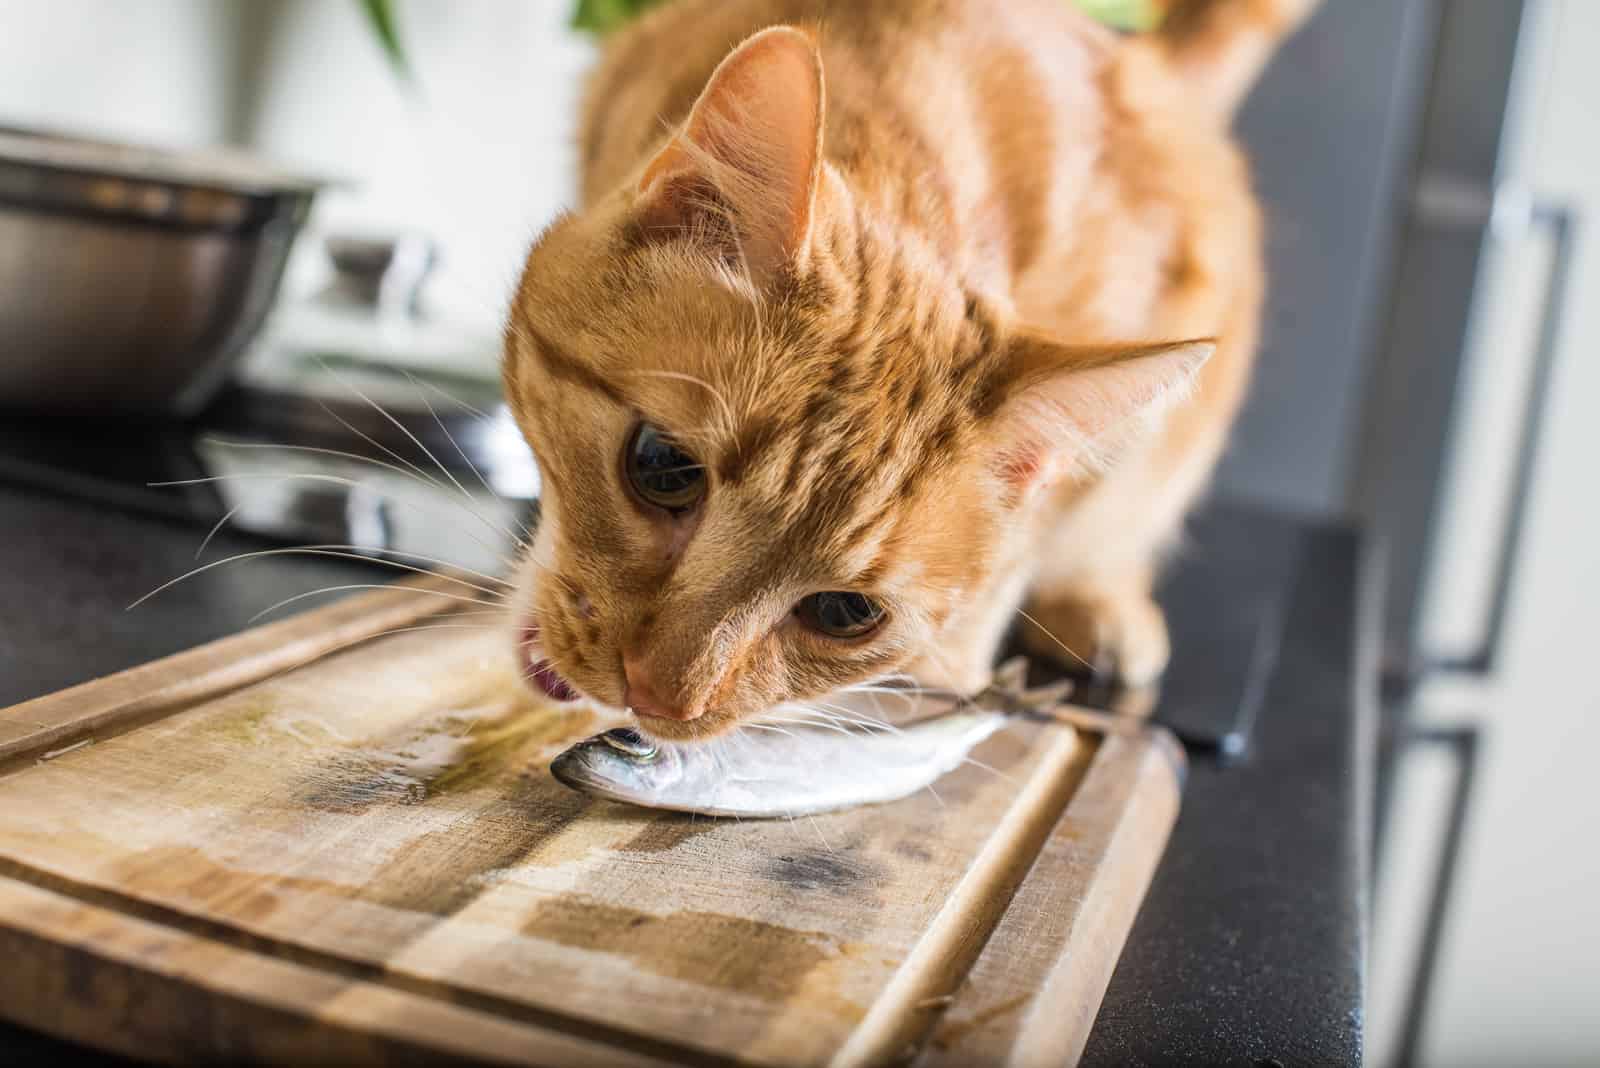 the cat eats a sardine from a wooden board